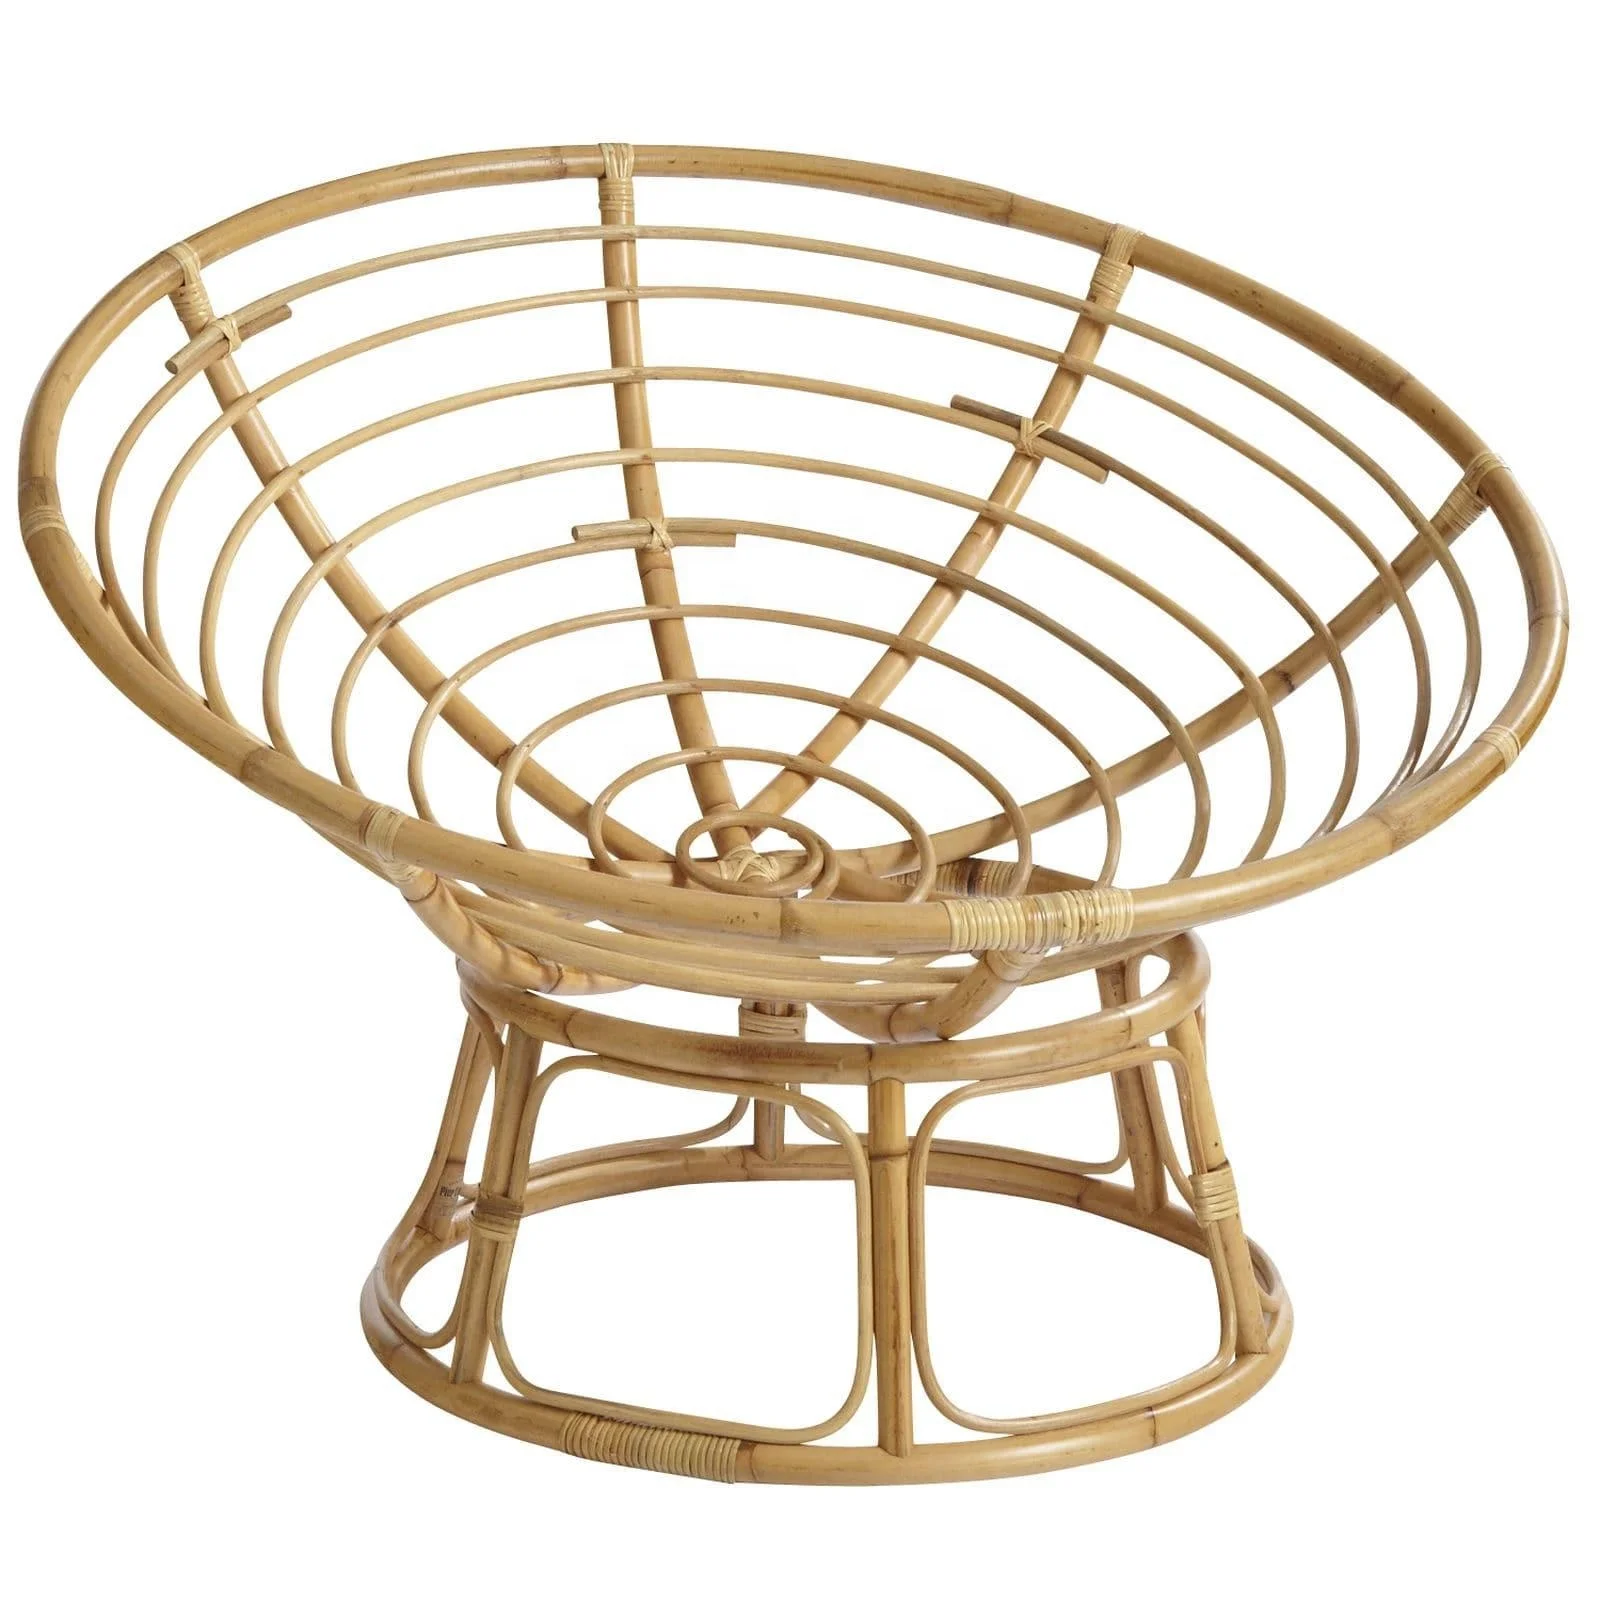 Rattan papasan chair with a bowl resting ( 100% natural color ) (1700004610096)